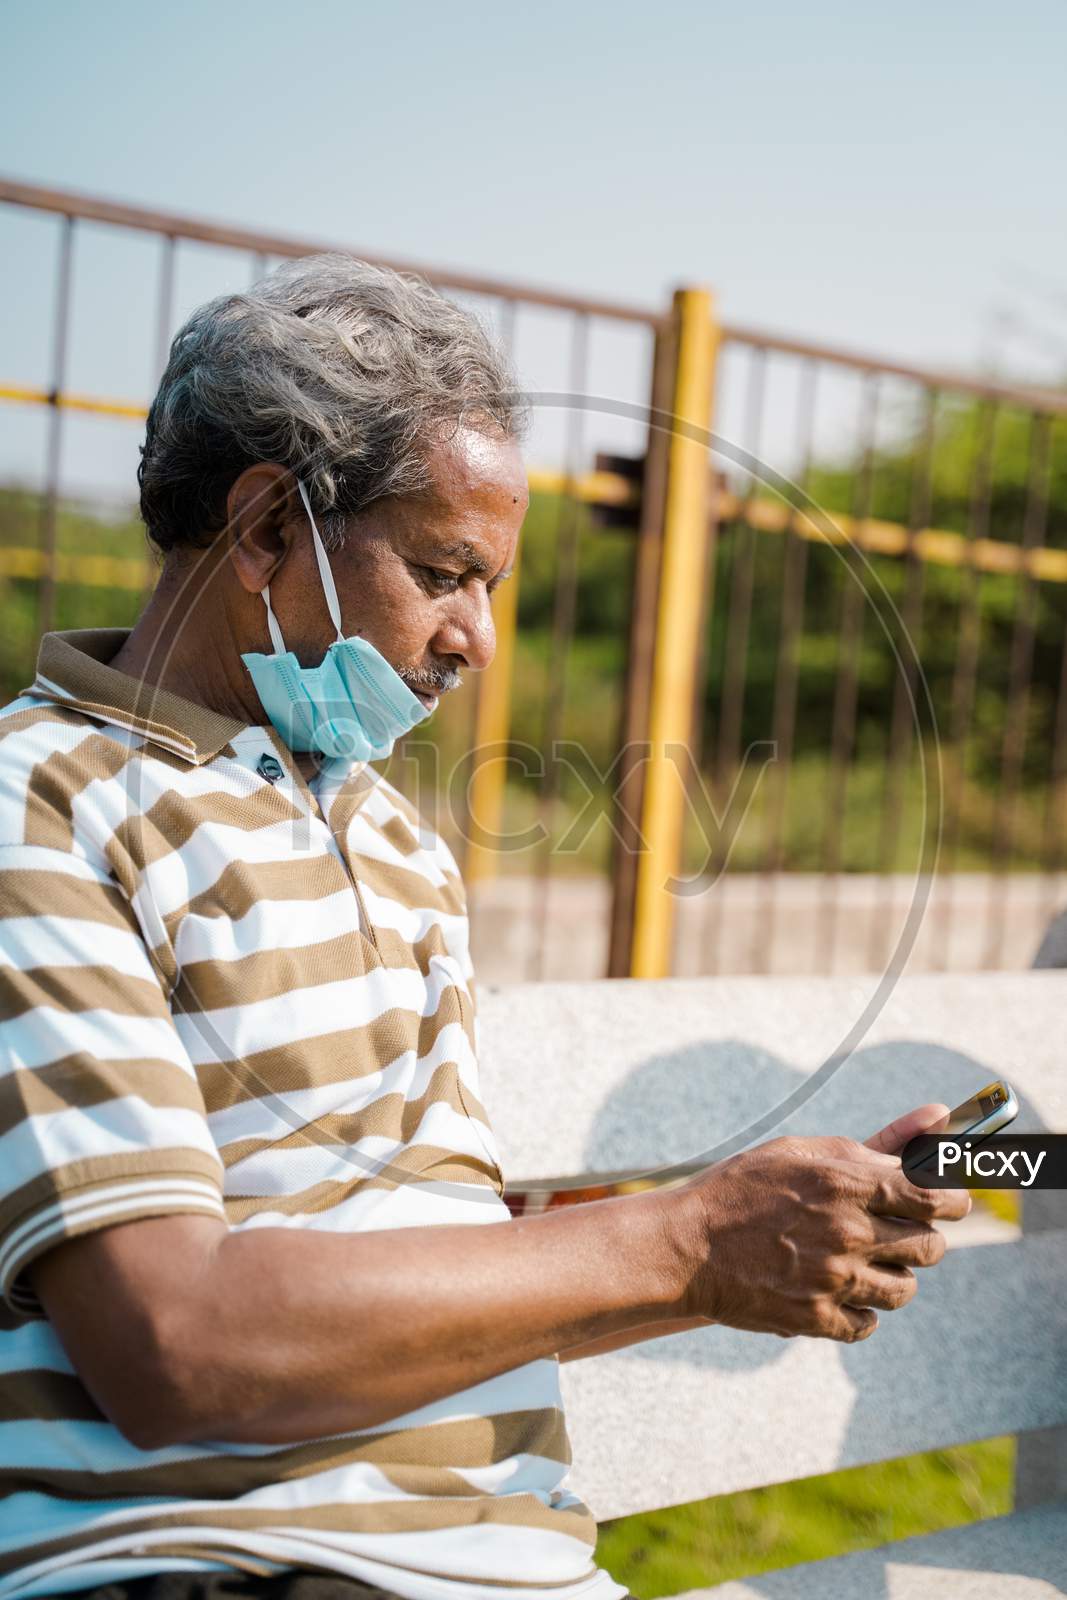 Senior Man With Medical Face Mask Below The Jaw Using Smartphone At Park - Concept Of Improper Mask Use Due To Coronavirus Covid-19 Pandemics.